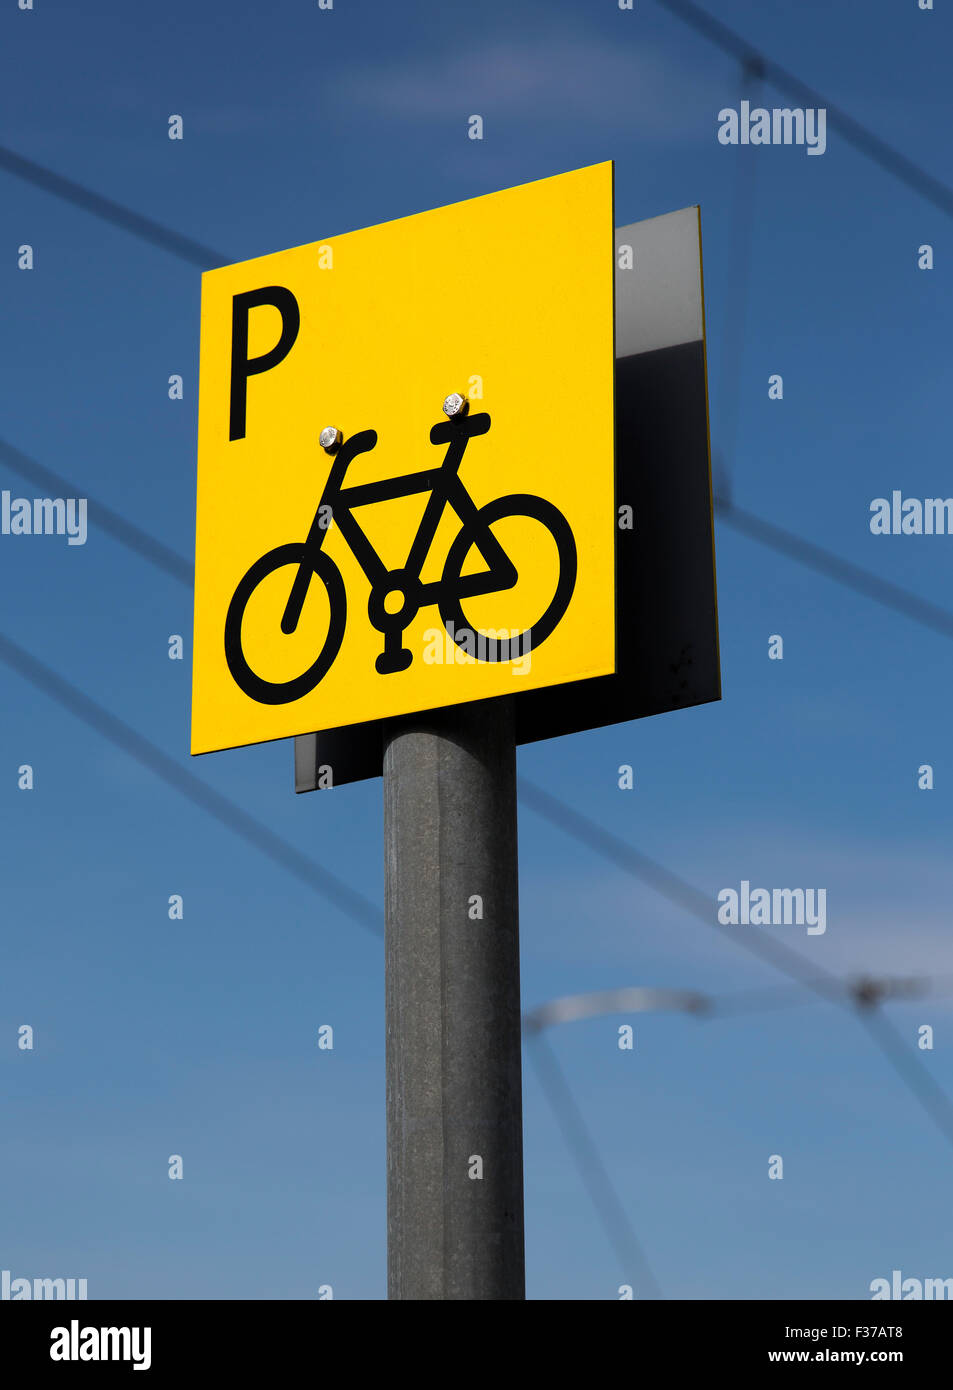 Parking sign for bicycles, Ahrensfelde, Berlin, Germany Stock Photo